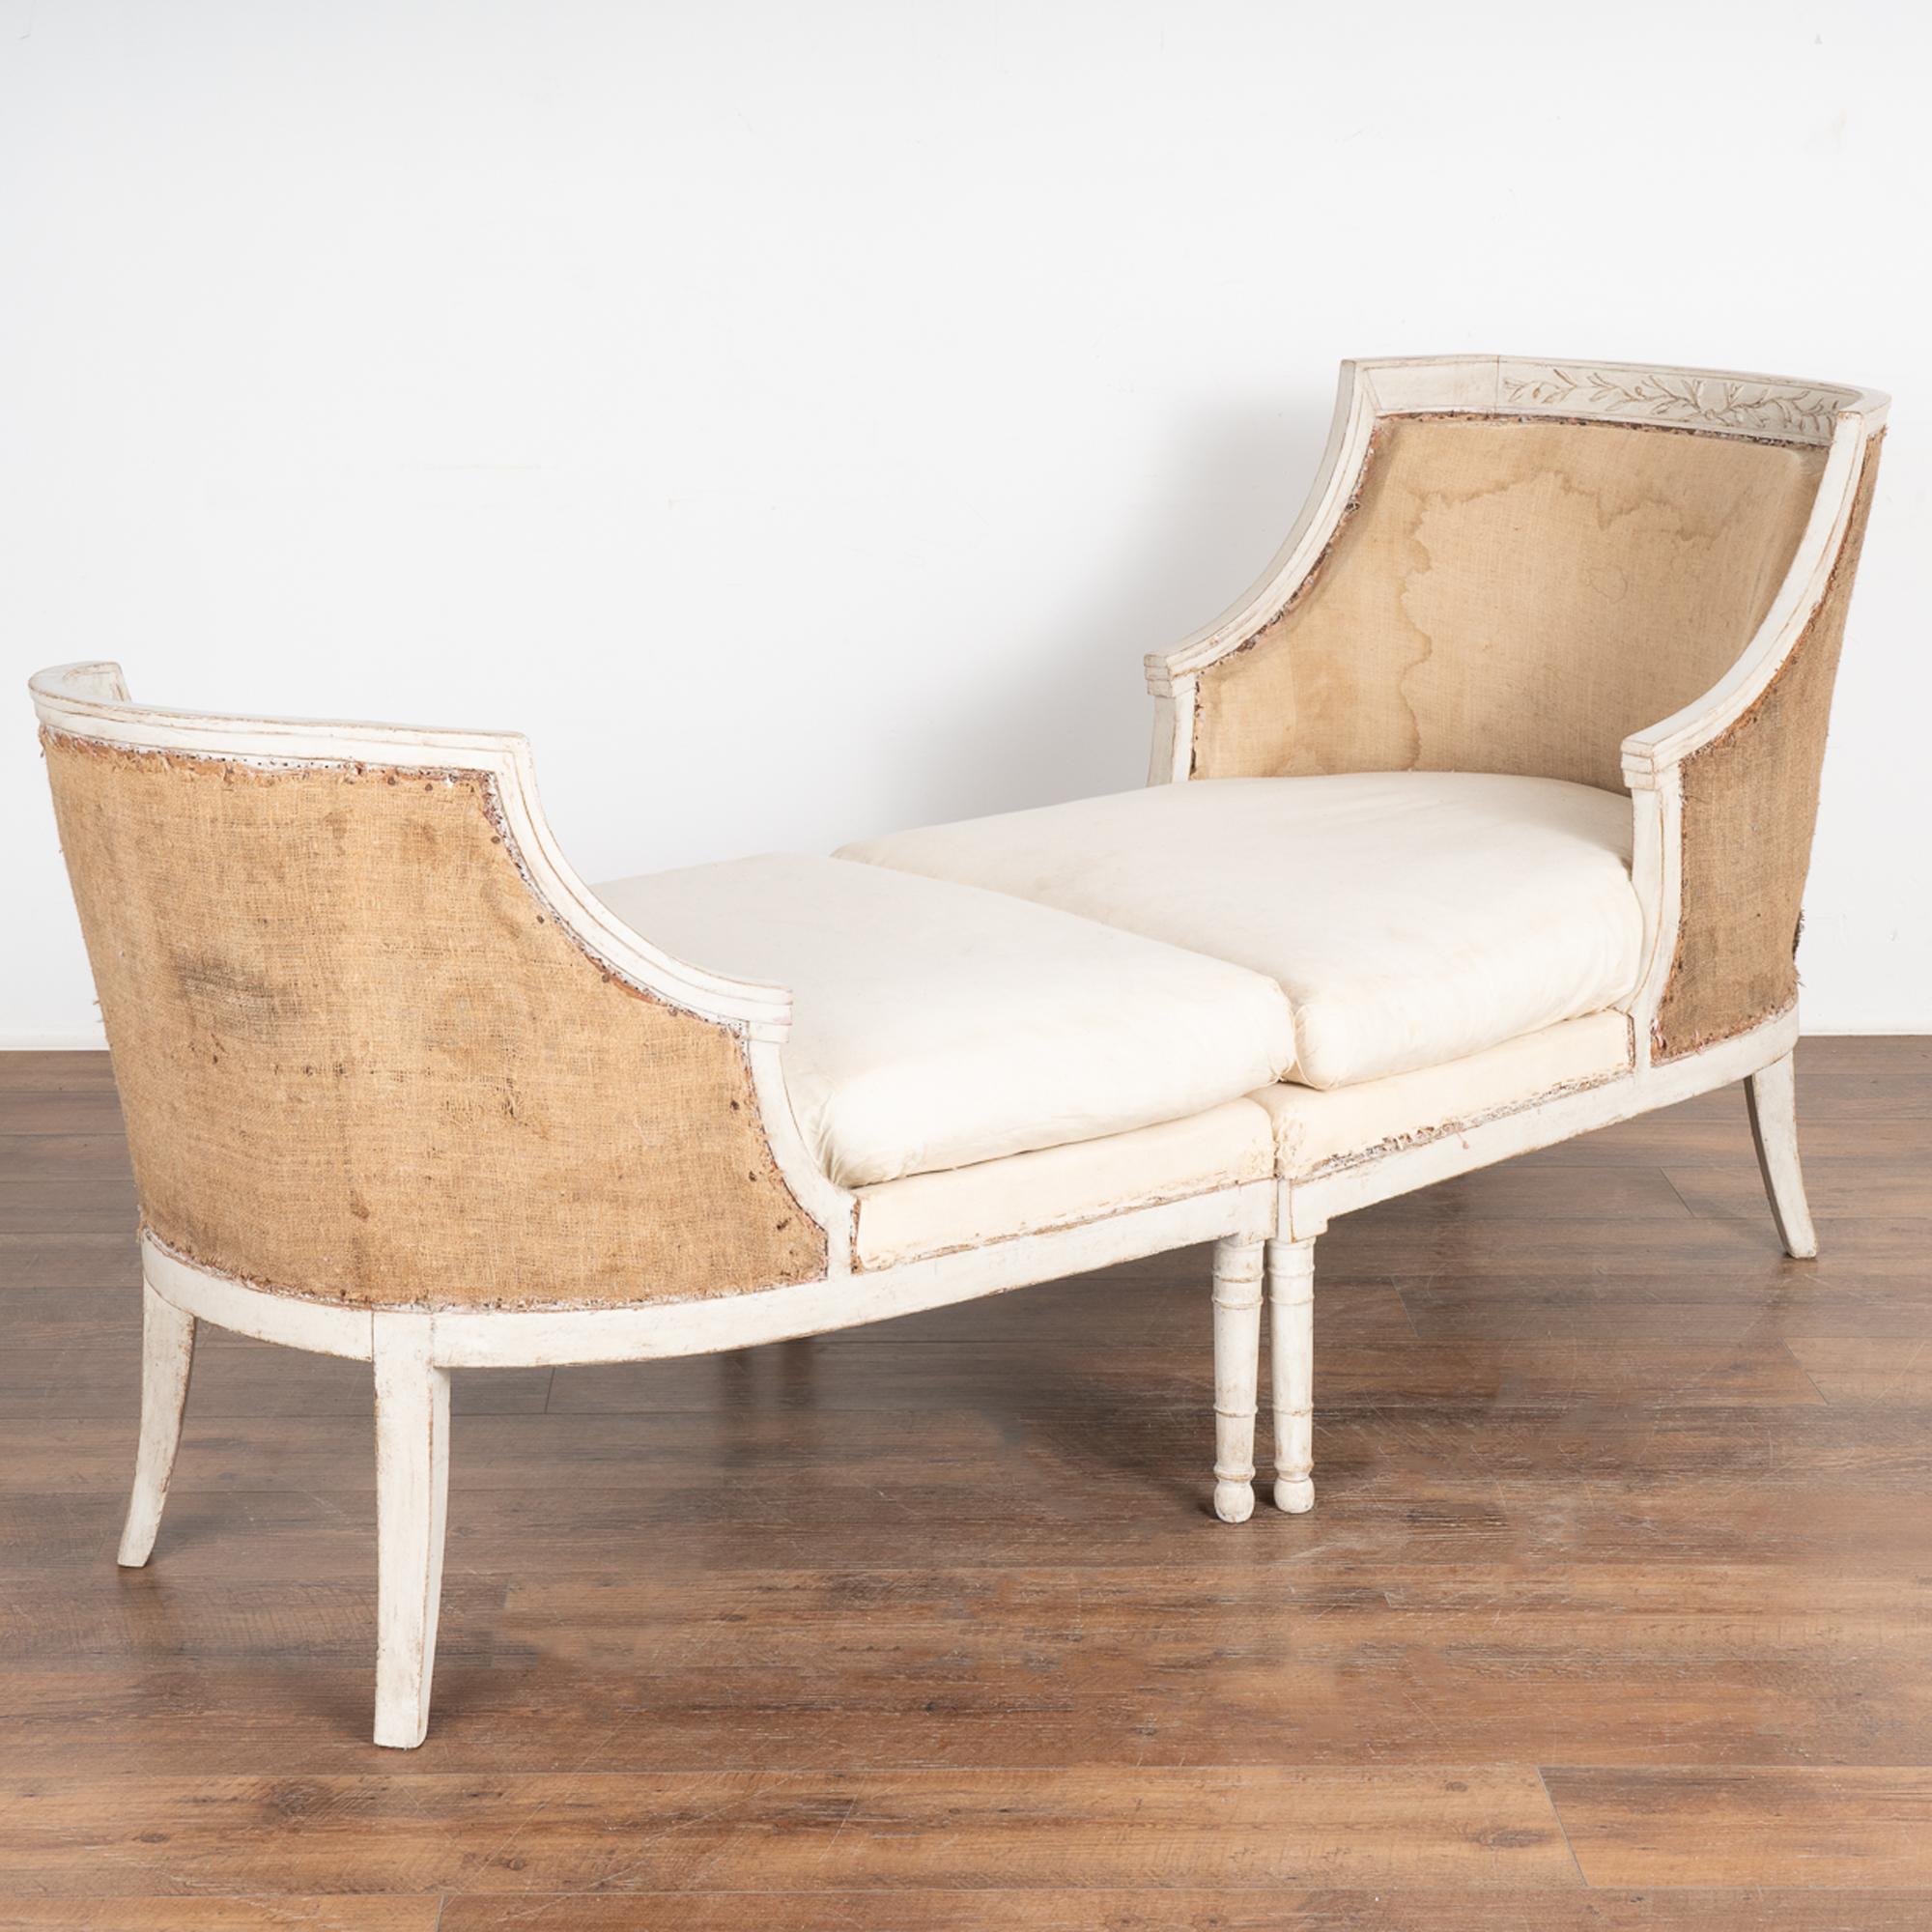 This lovely pair of Swedish chairs is a rare find; when placed together, they create a unique sofa or settee. They were likely commisioned as a one of a kind set when they were crafted. The two chairs are designed to fit together with both concave